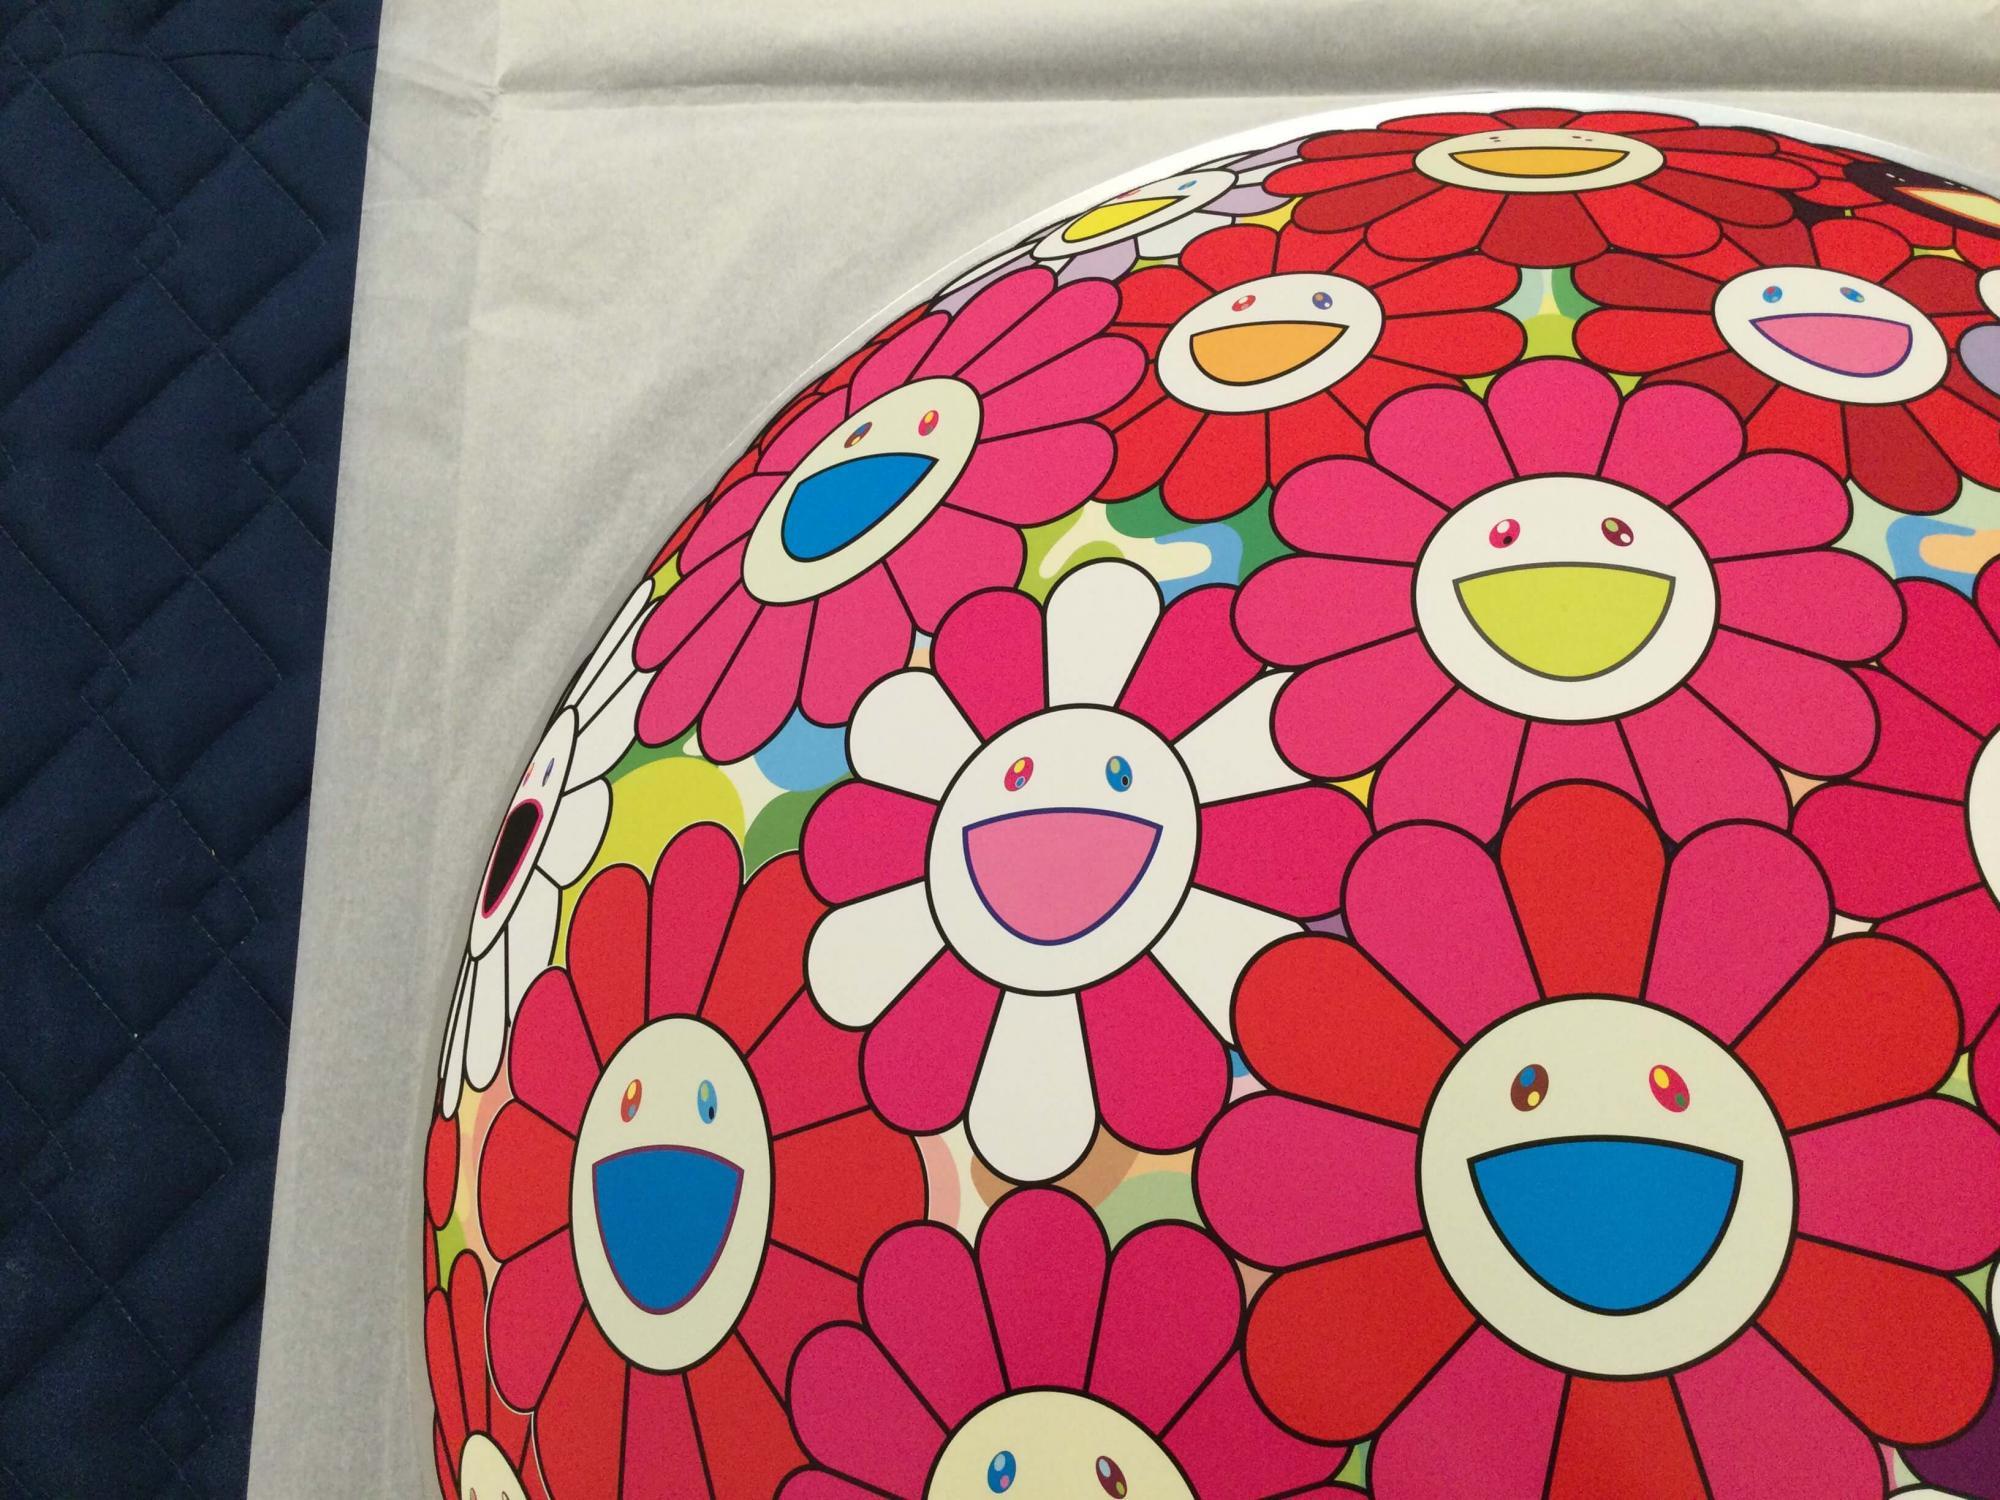 Flowerball (3D) - Turn Red! Limited Edition (print) Murakami signed and numbered For Sale 2